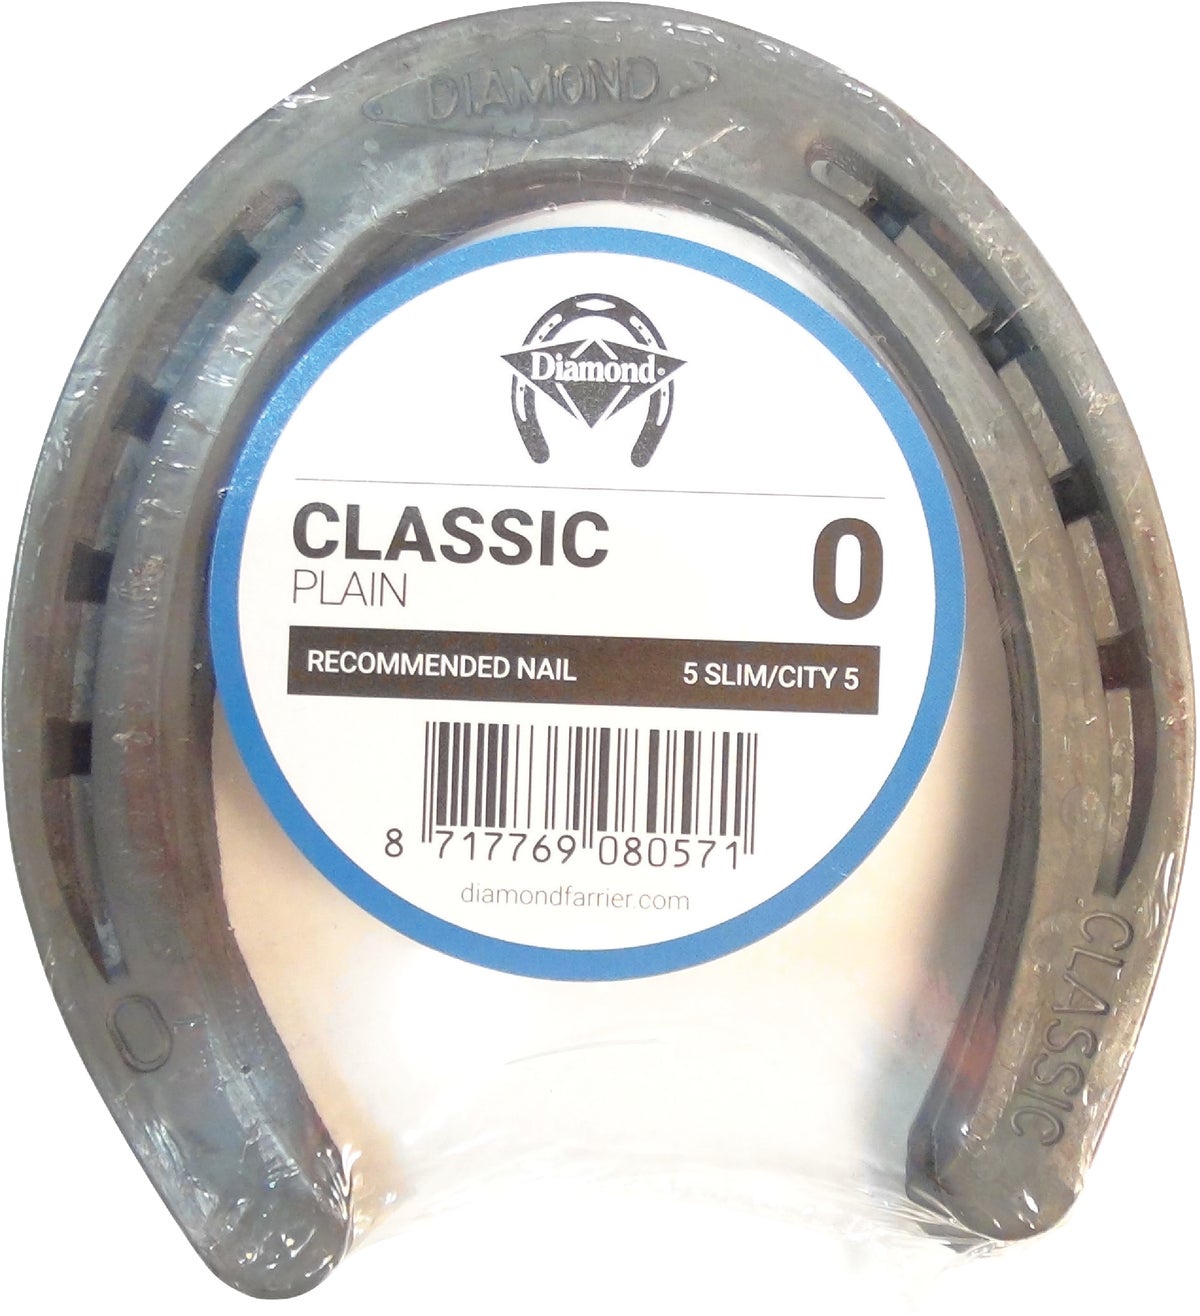 Diamond Farrier Classic Plain Horseshoes, Size 00, 4 pk. at Tractor Supply  Co.